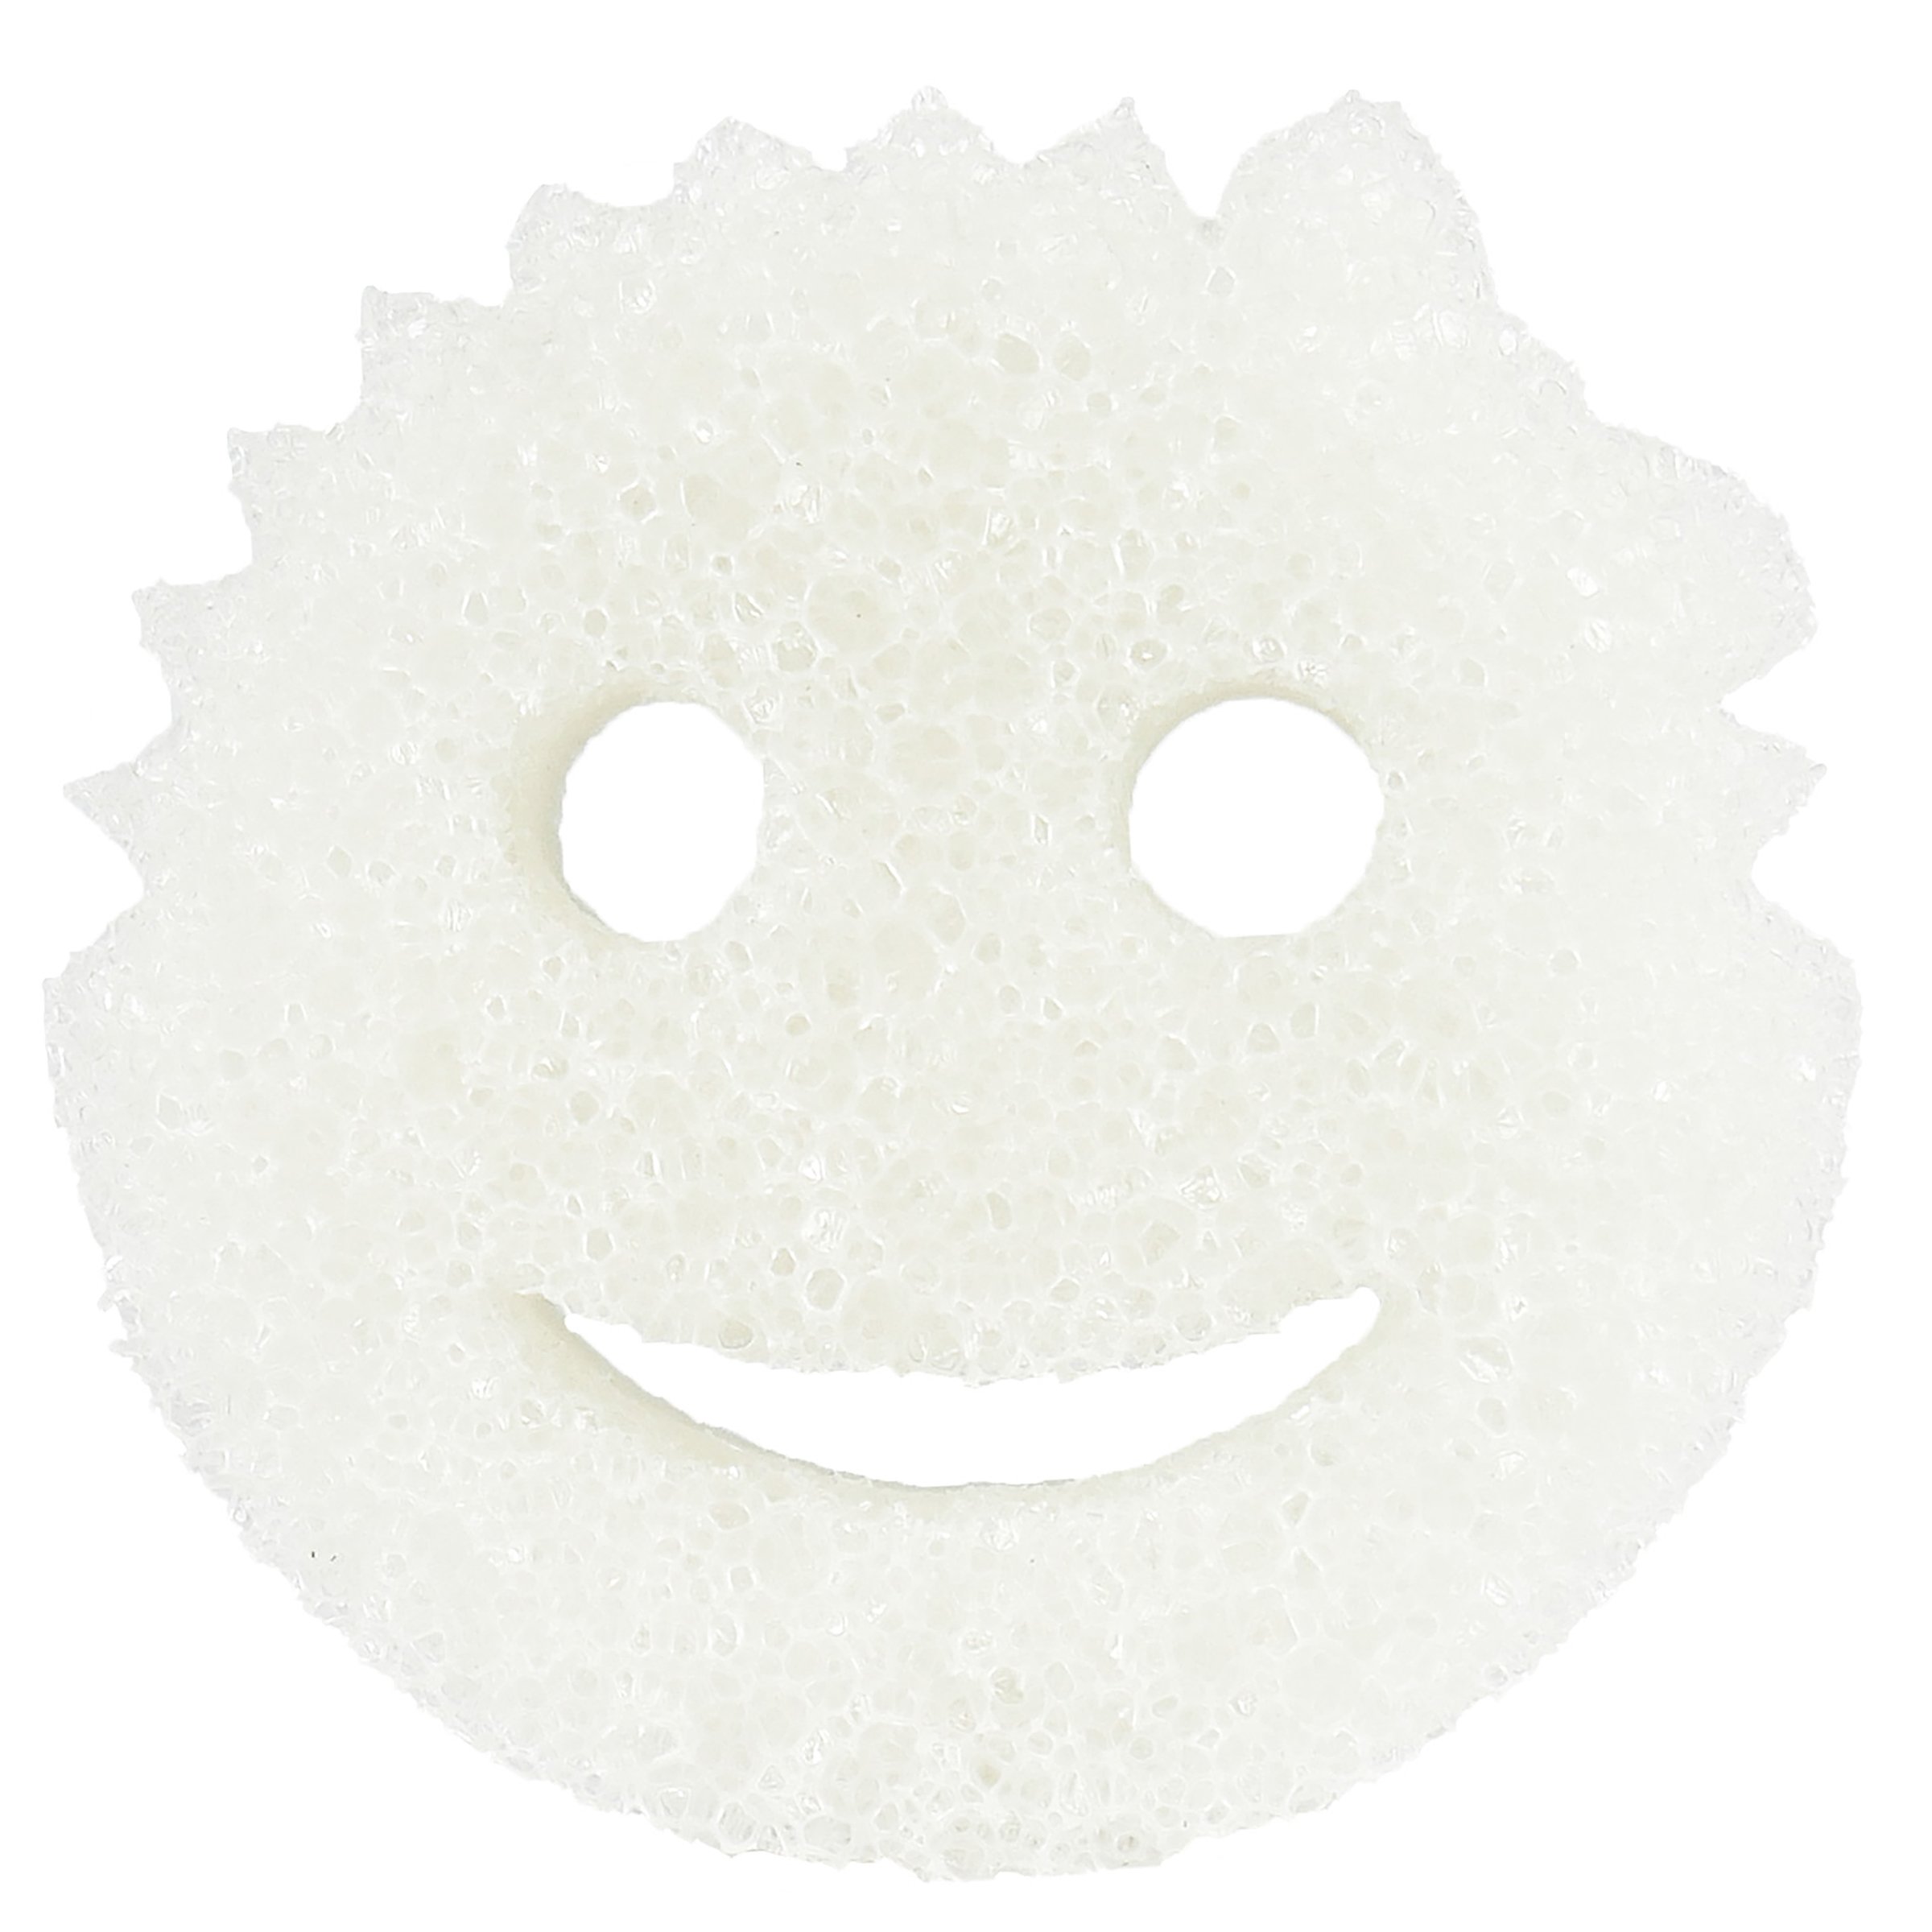 Scrub Daddy Special Edition FlexTexture Ghost Sponge - Shop Sponges &  Scrubbers at H-E-B